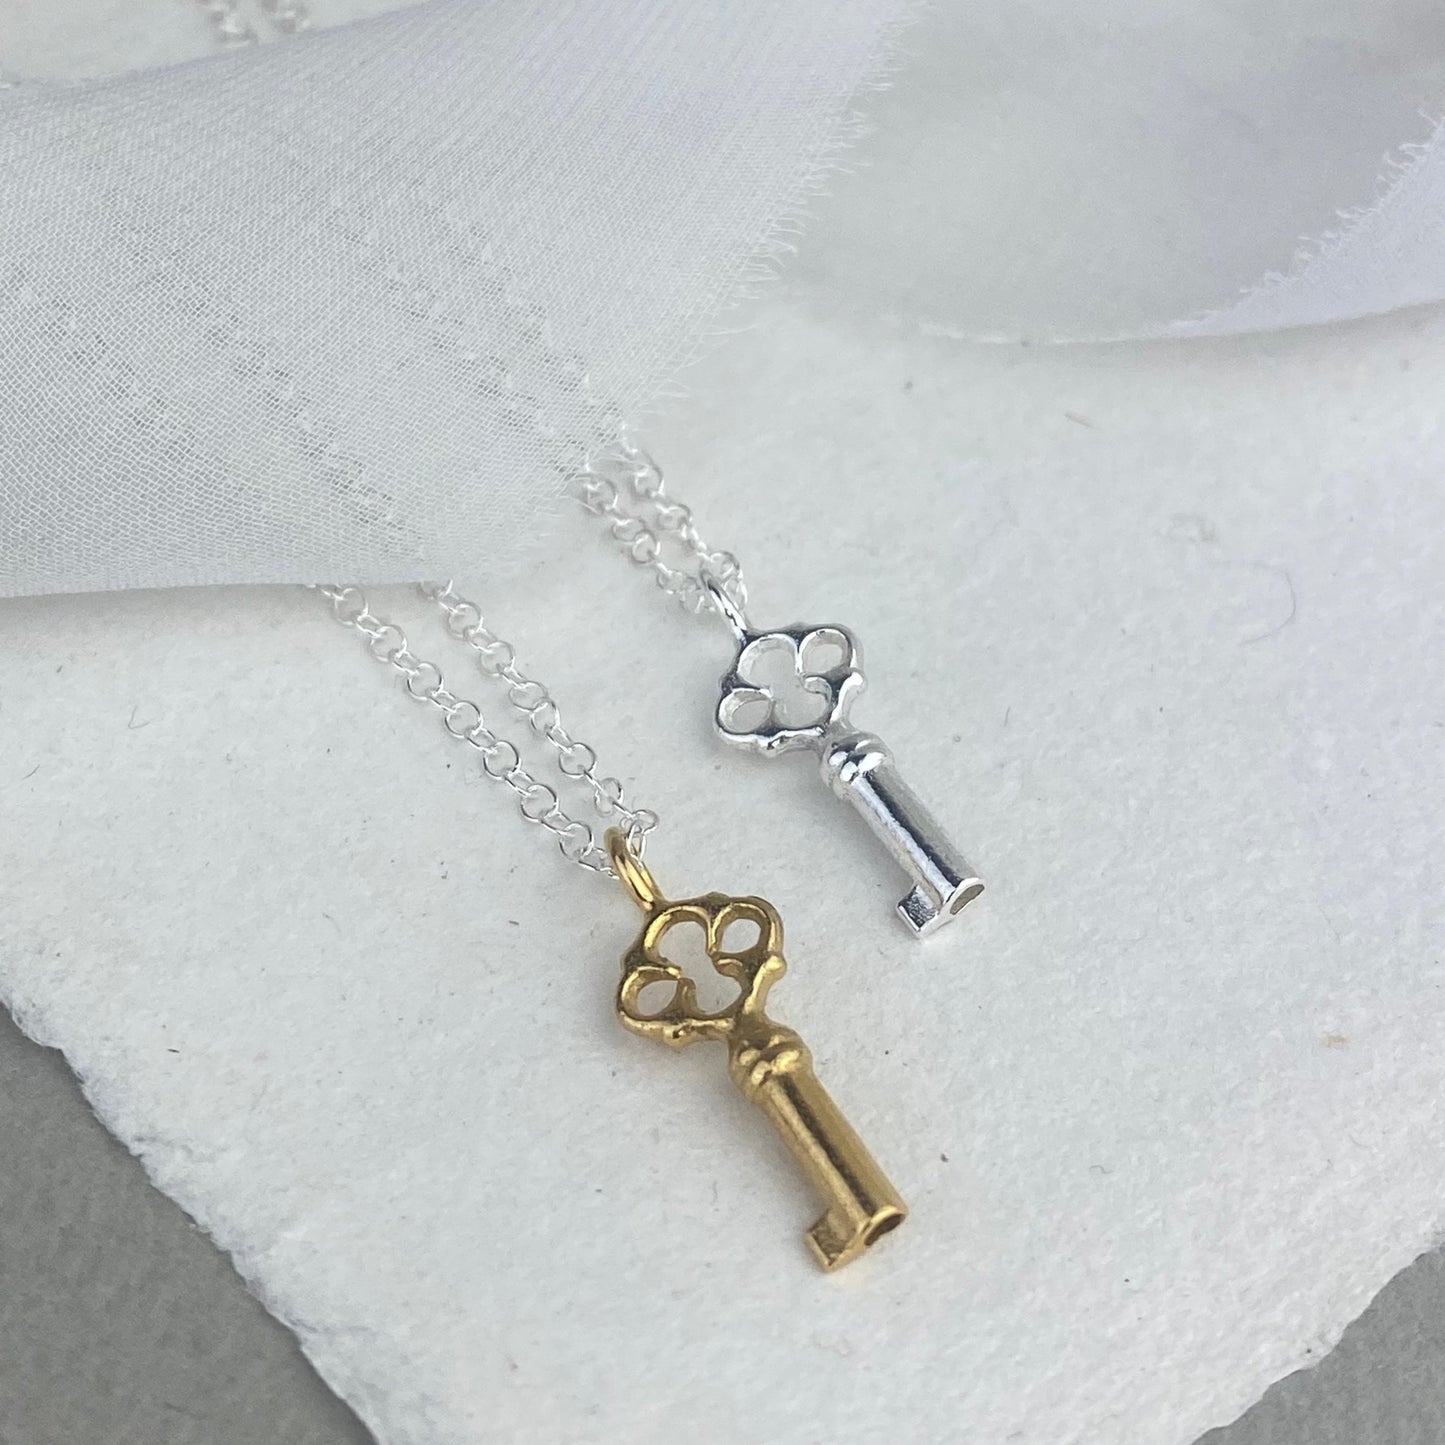 The Lock Charm necklace- sterling silver and 22ct gold vermeil charms on a trace chain necklace